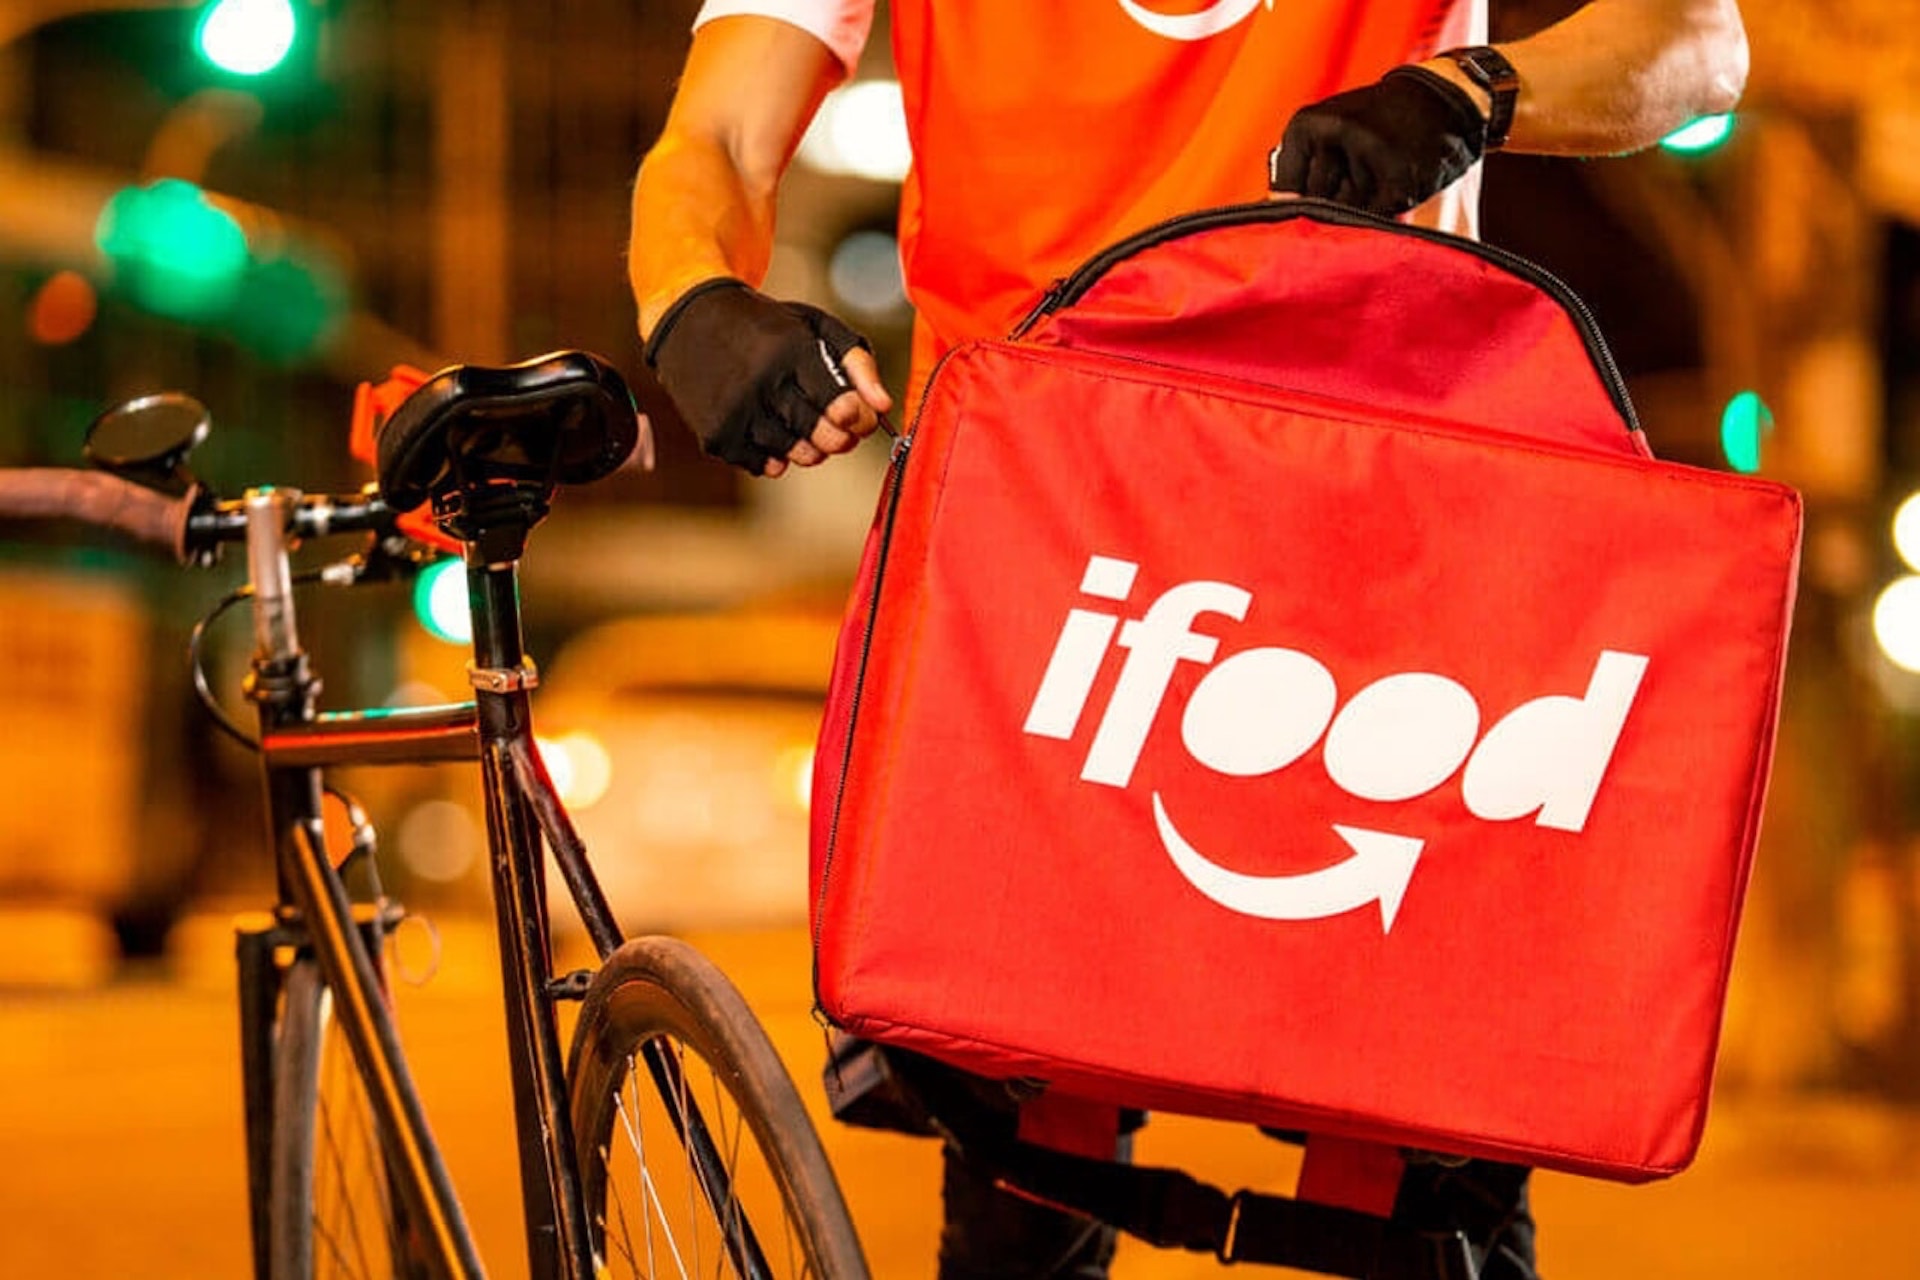 Brazil,IFood is one of Brazil's unicorns, but controllers say there are no plans for IPO.